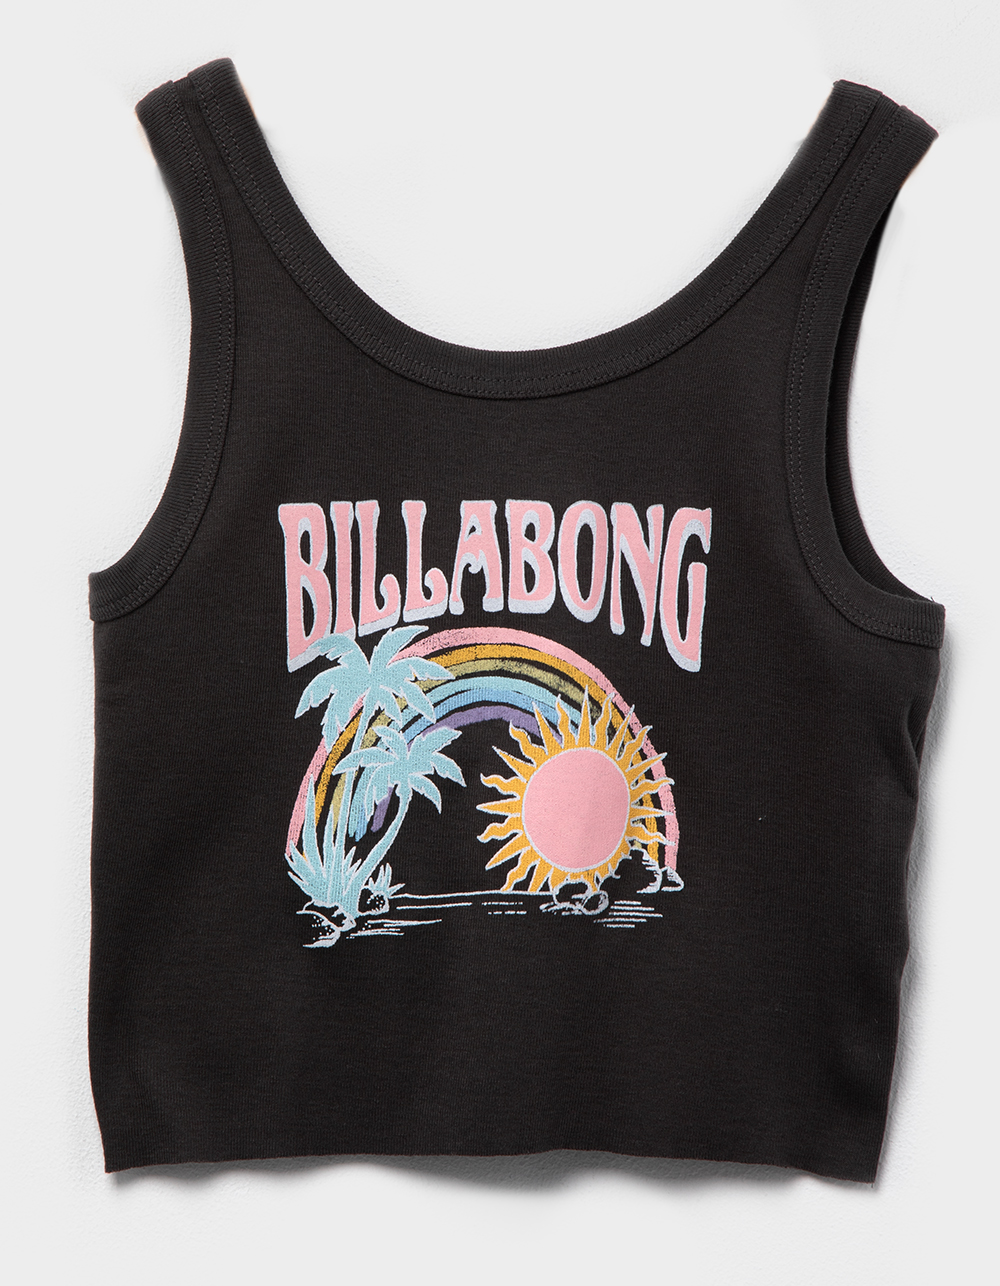 BILLABONG Blissed Out Girls Tank Top